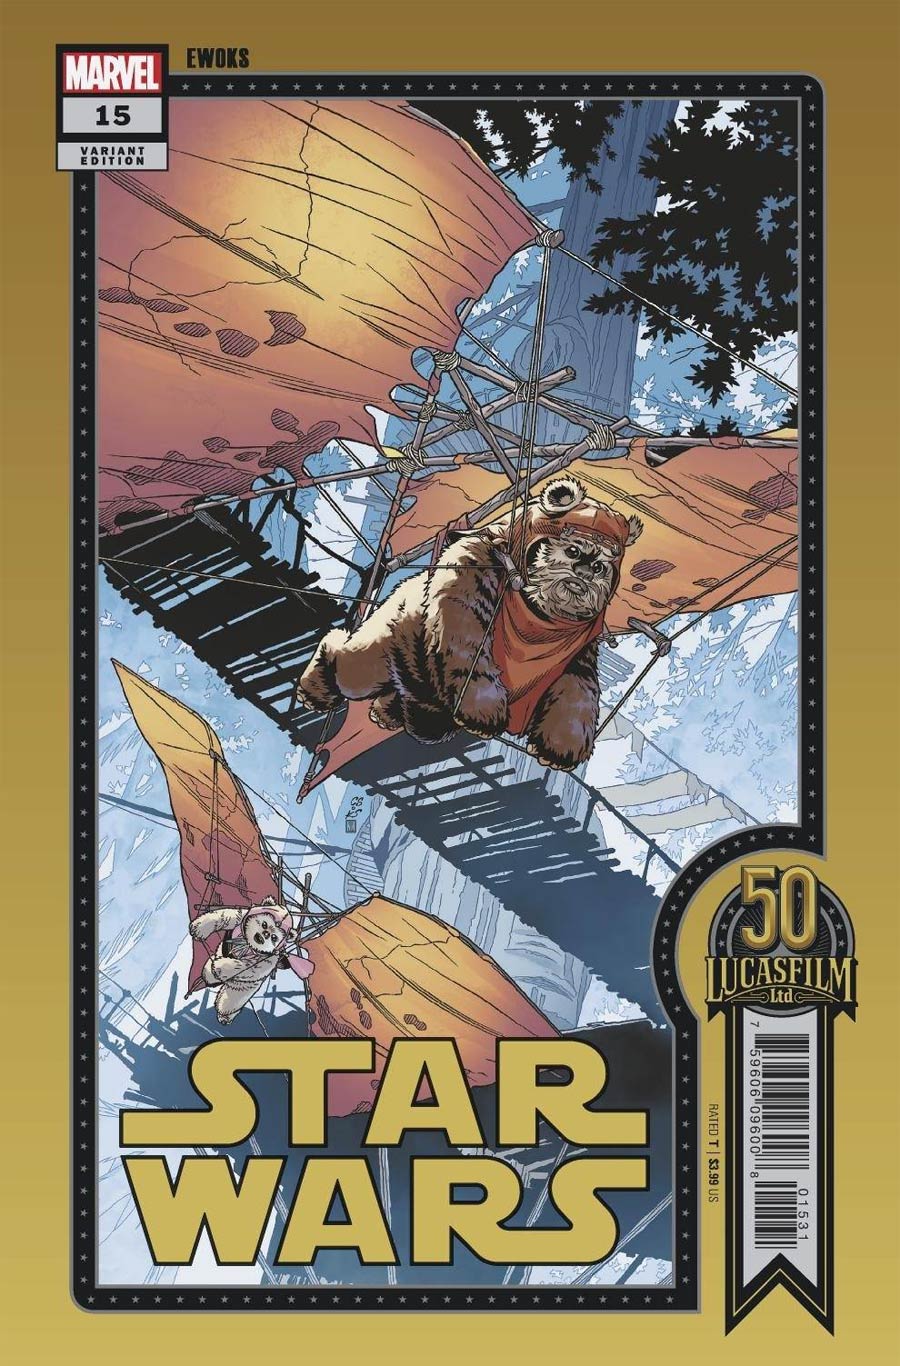 Star Wars Vol 5 #15 Cover C Variant Chris Sprouse Lucasfilm 50th Anniversary Cover (War Of The Bounty Hunters Tie-In)